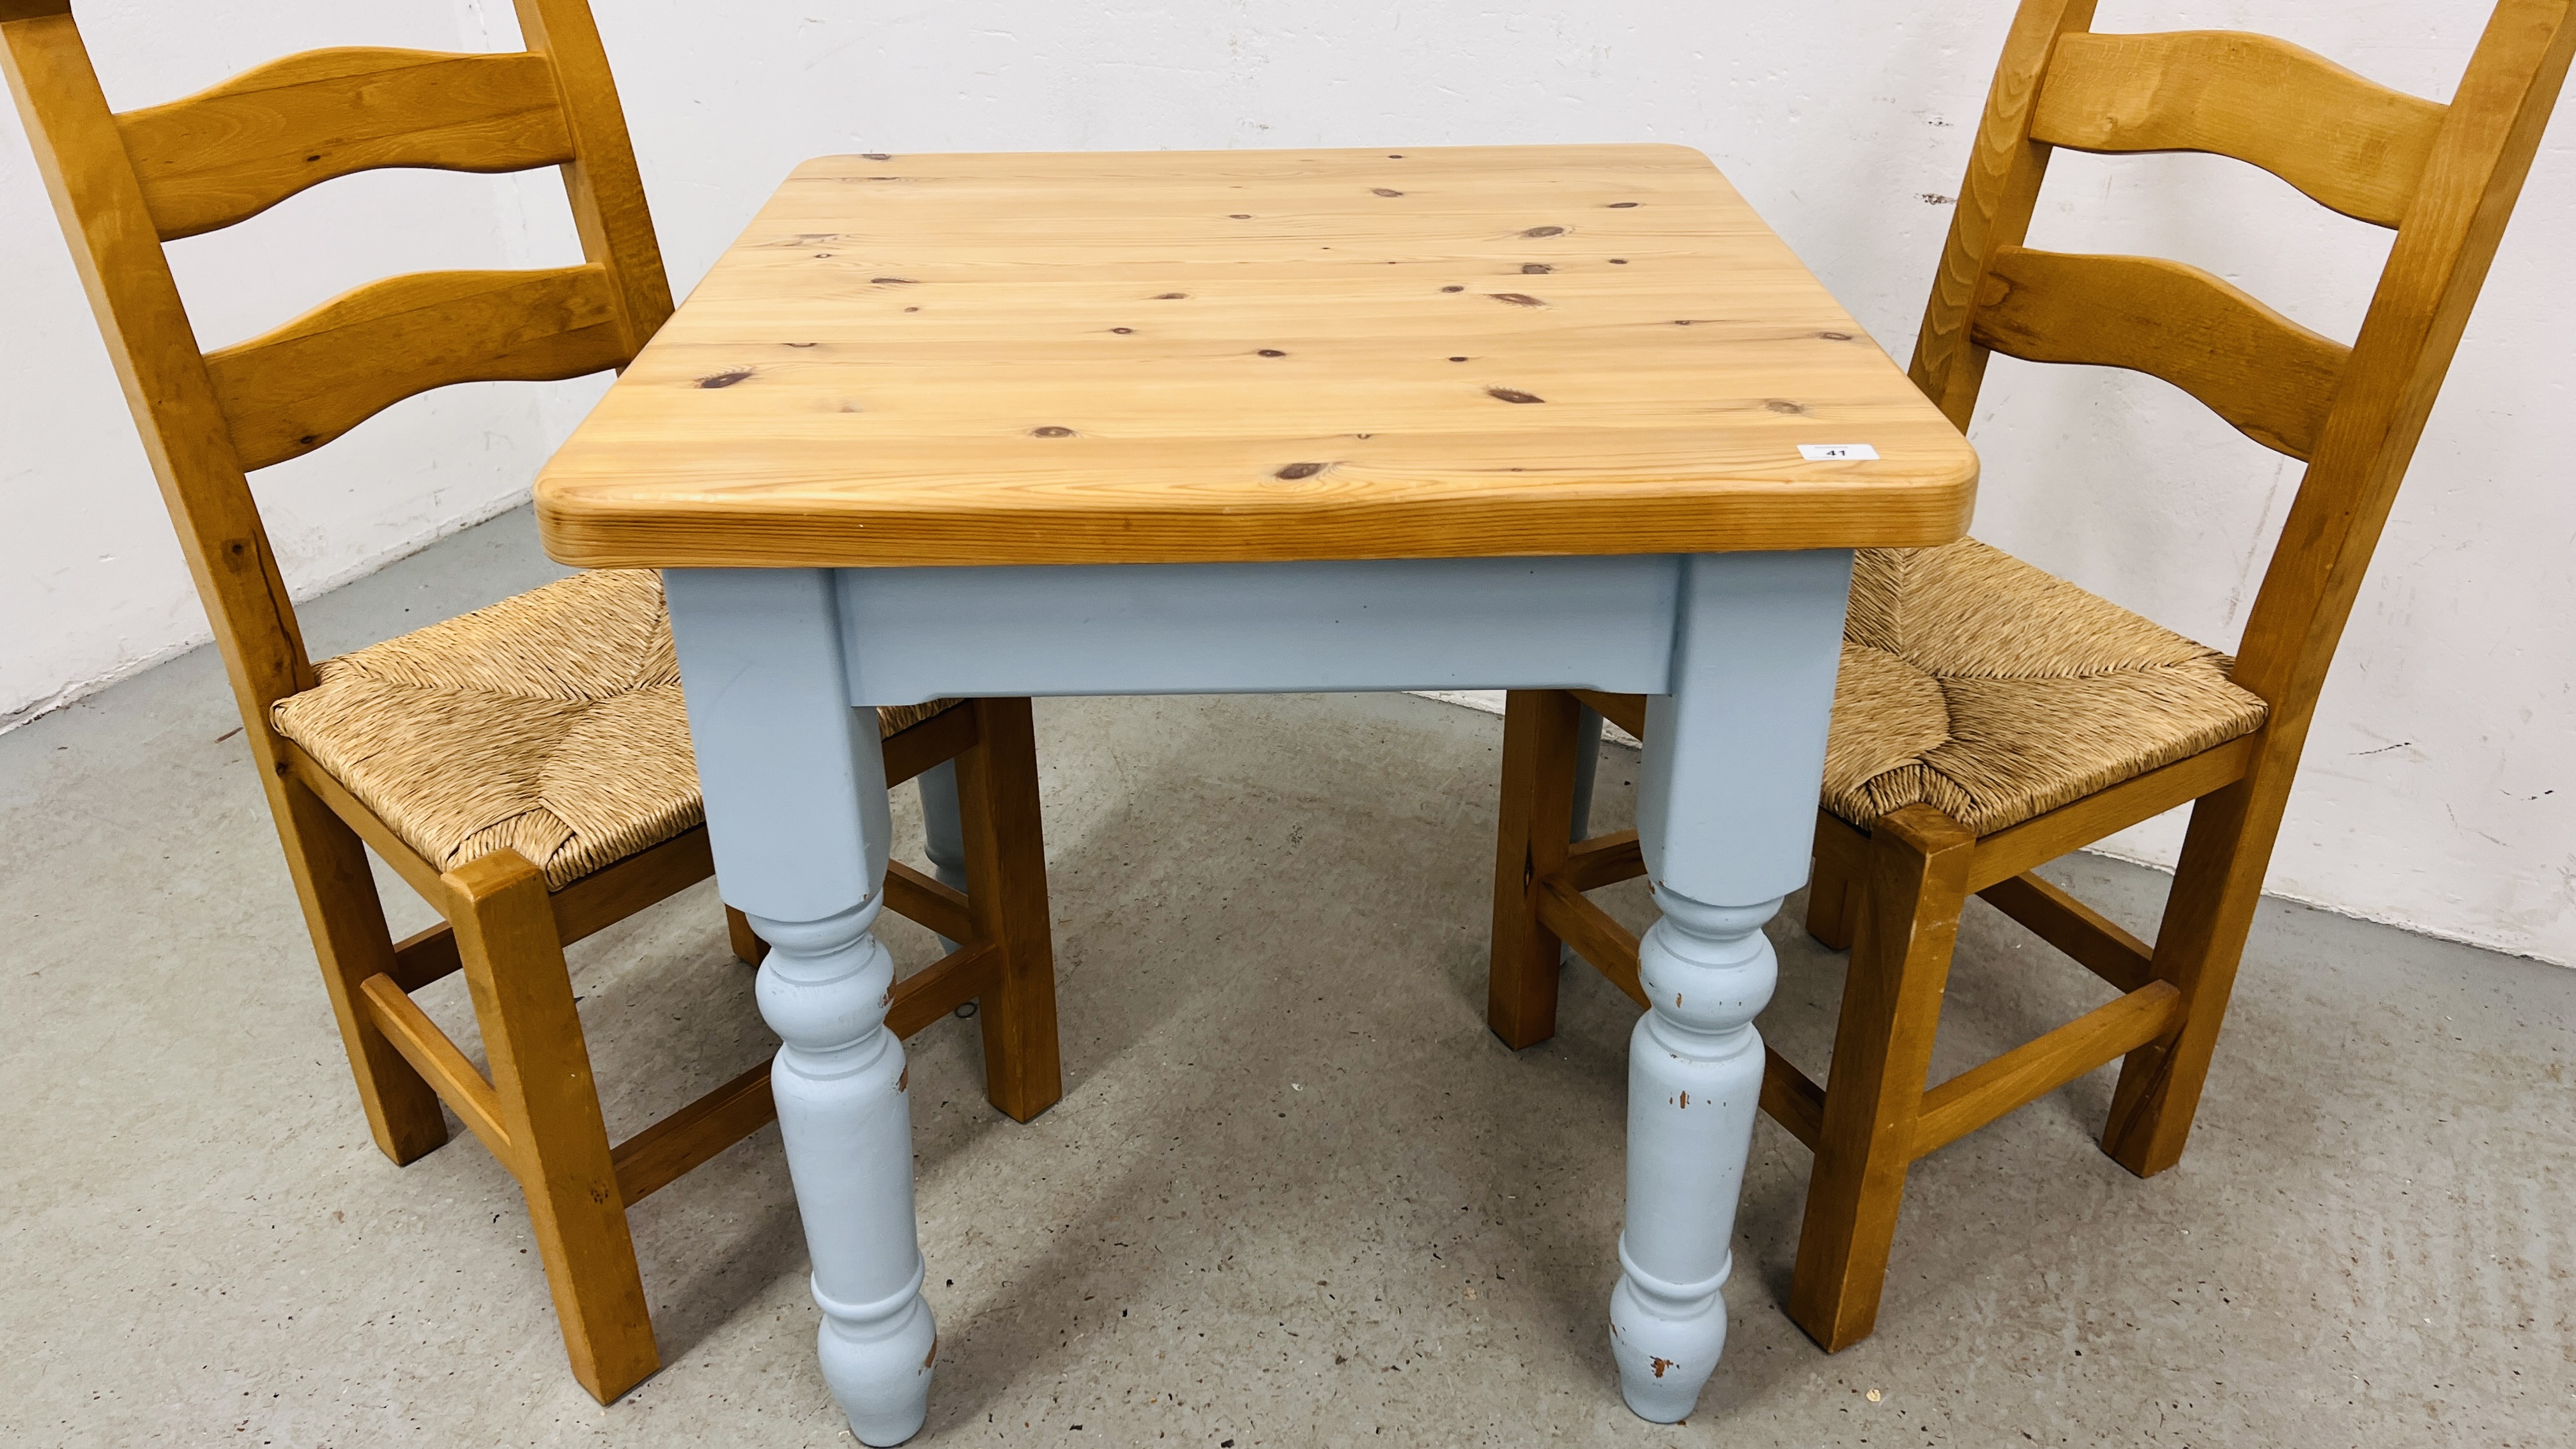 A SOLID PINE BREAKFAST TABLE WITH NATURAL WAXED FINISH TOP AND TWO SOLID BEECHWOOD DINING CHAIRS - Image 2 of 8